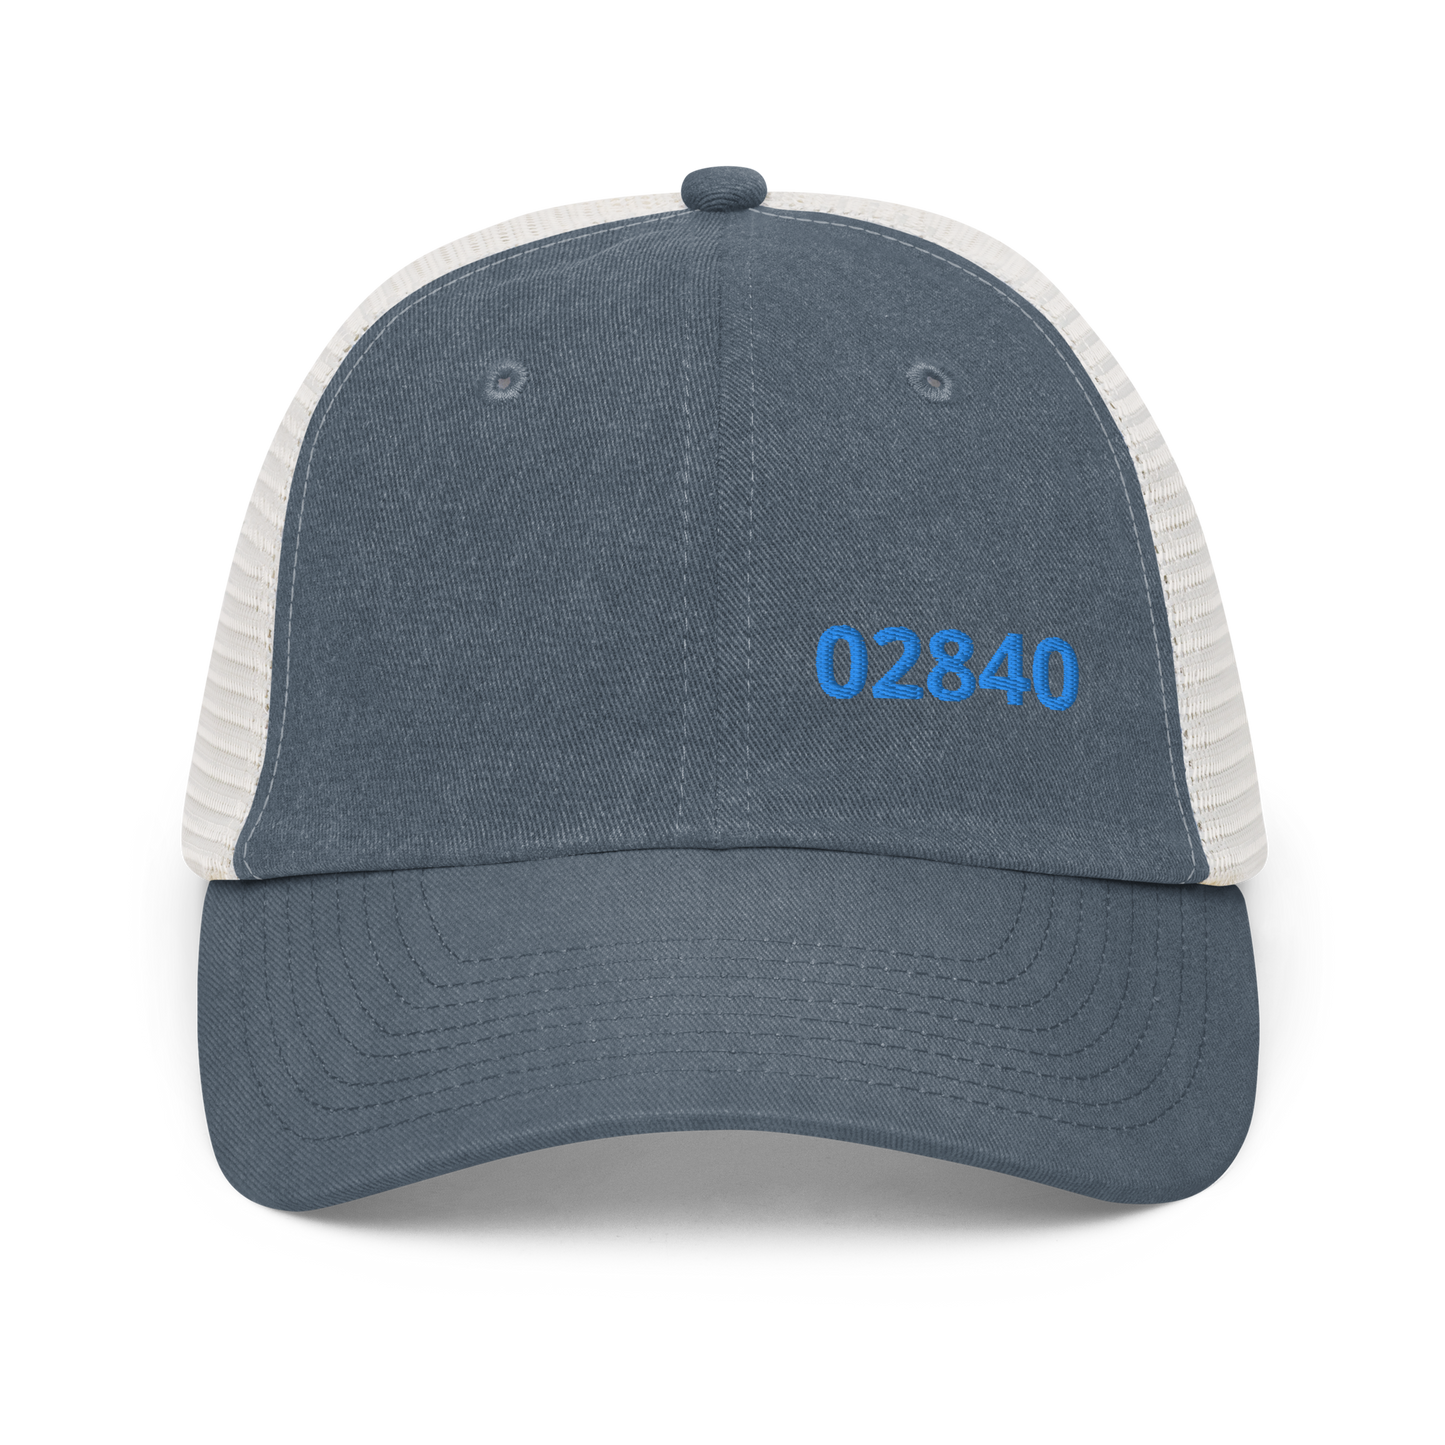 02840 Hat (Unisex, Embroidered)